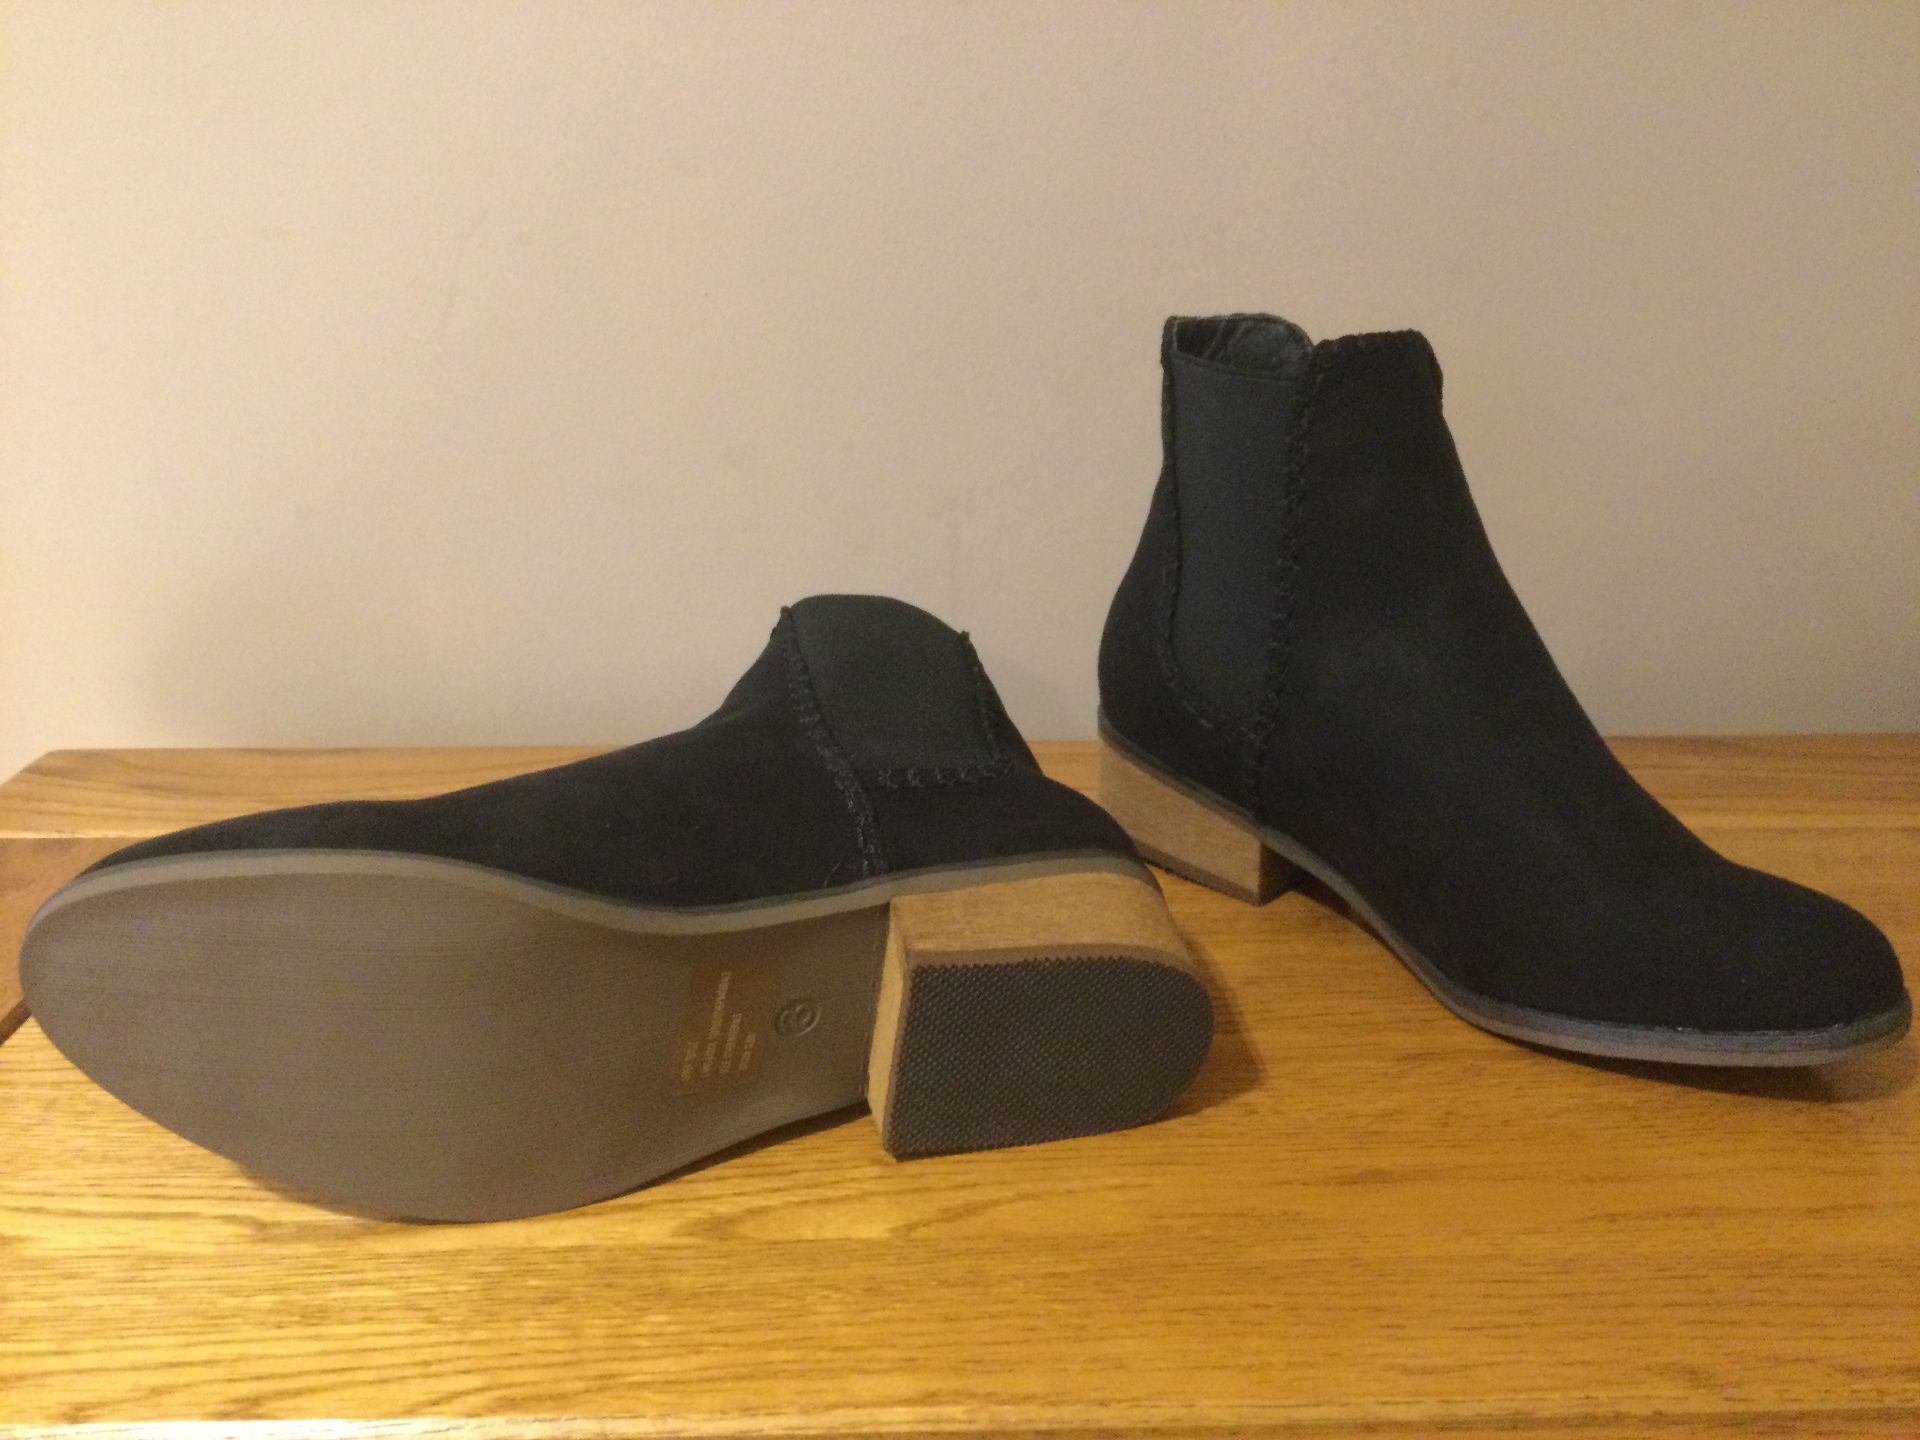 Dolcis “Pasha” Low Heel Ankle Boots, Size 3, Black - New RRP £45.99 - Image 6 of 6